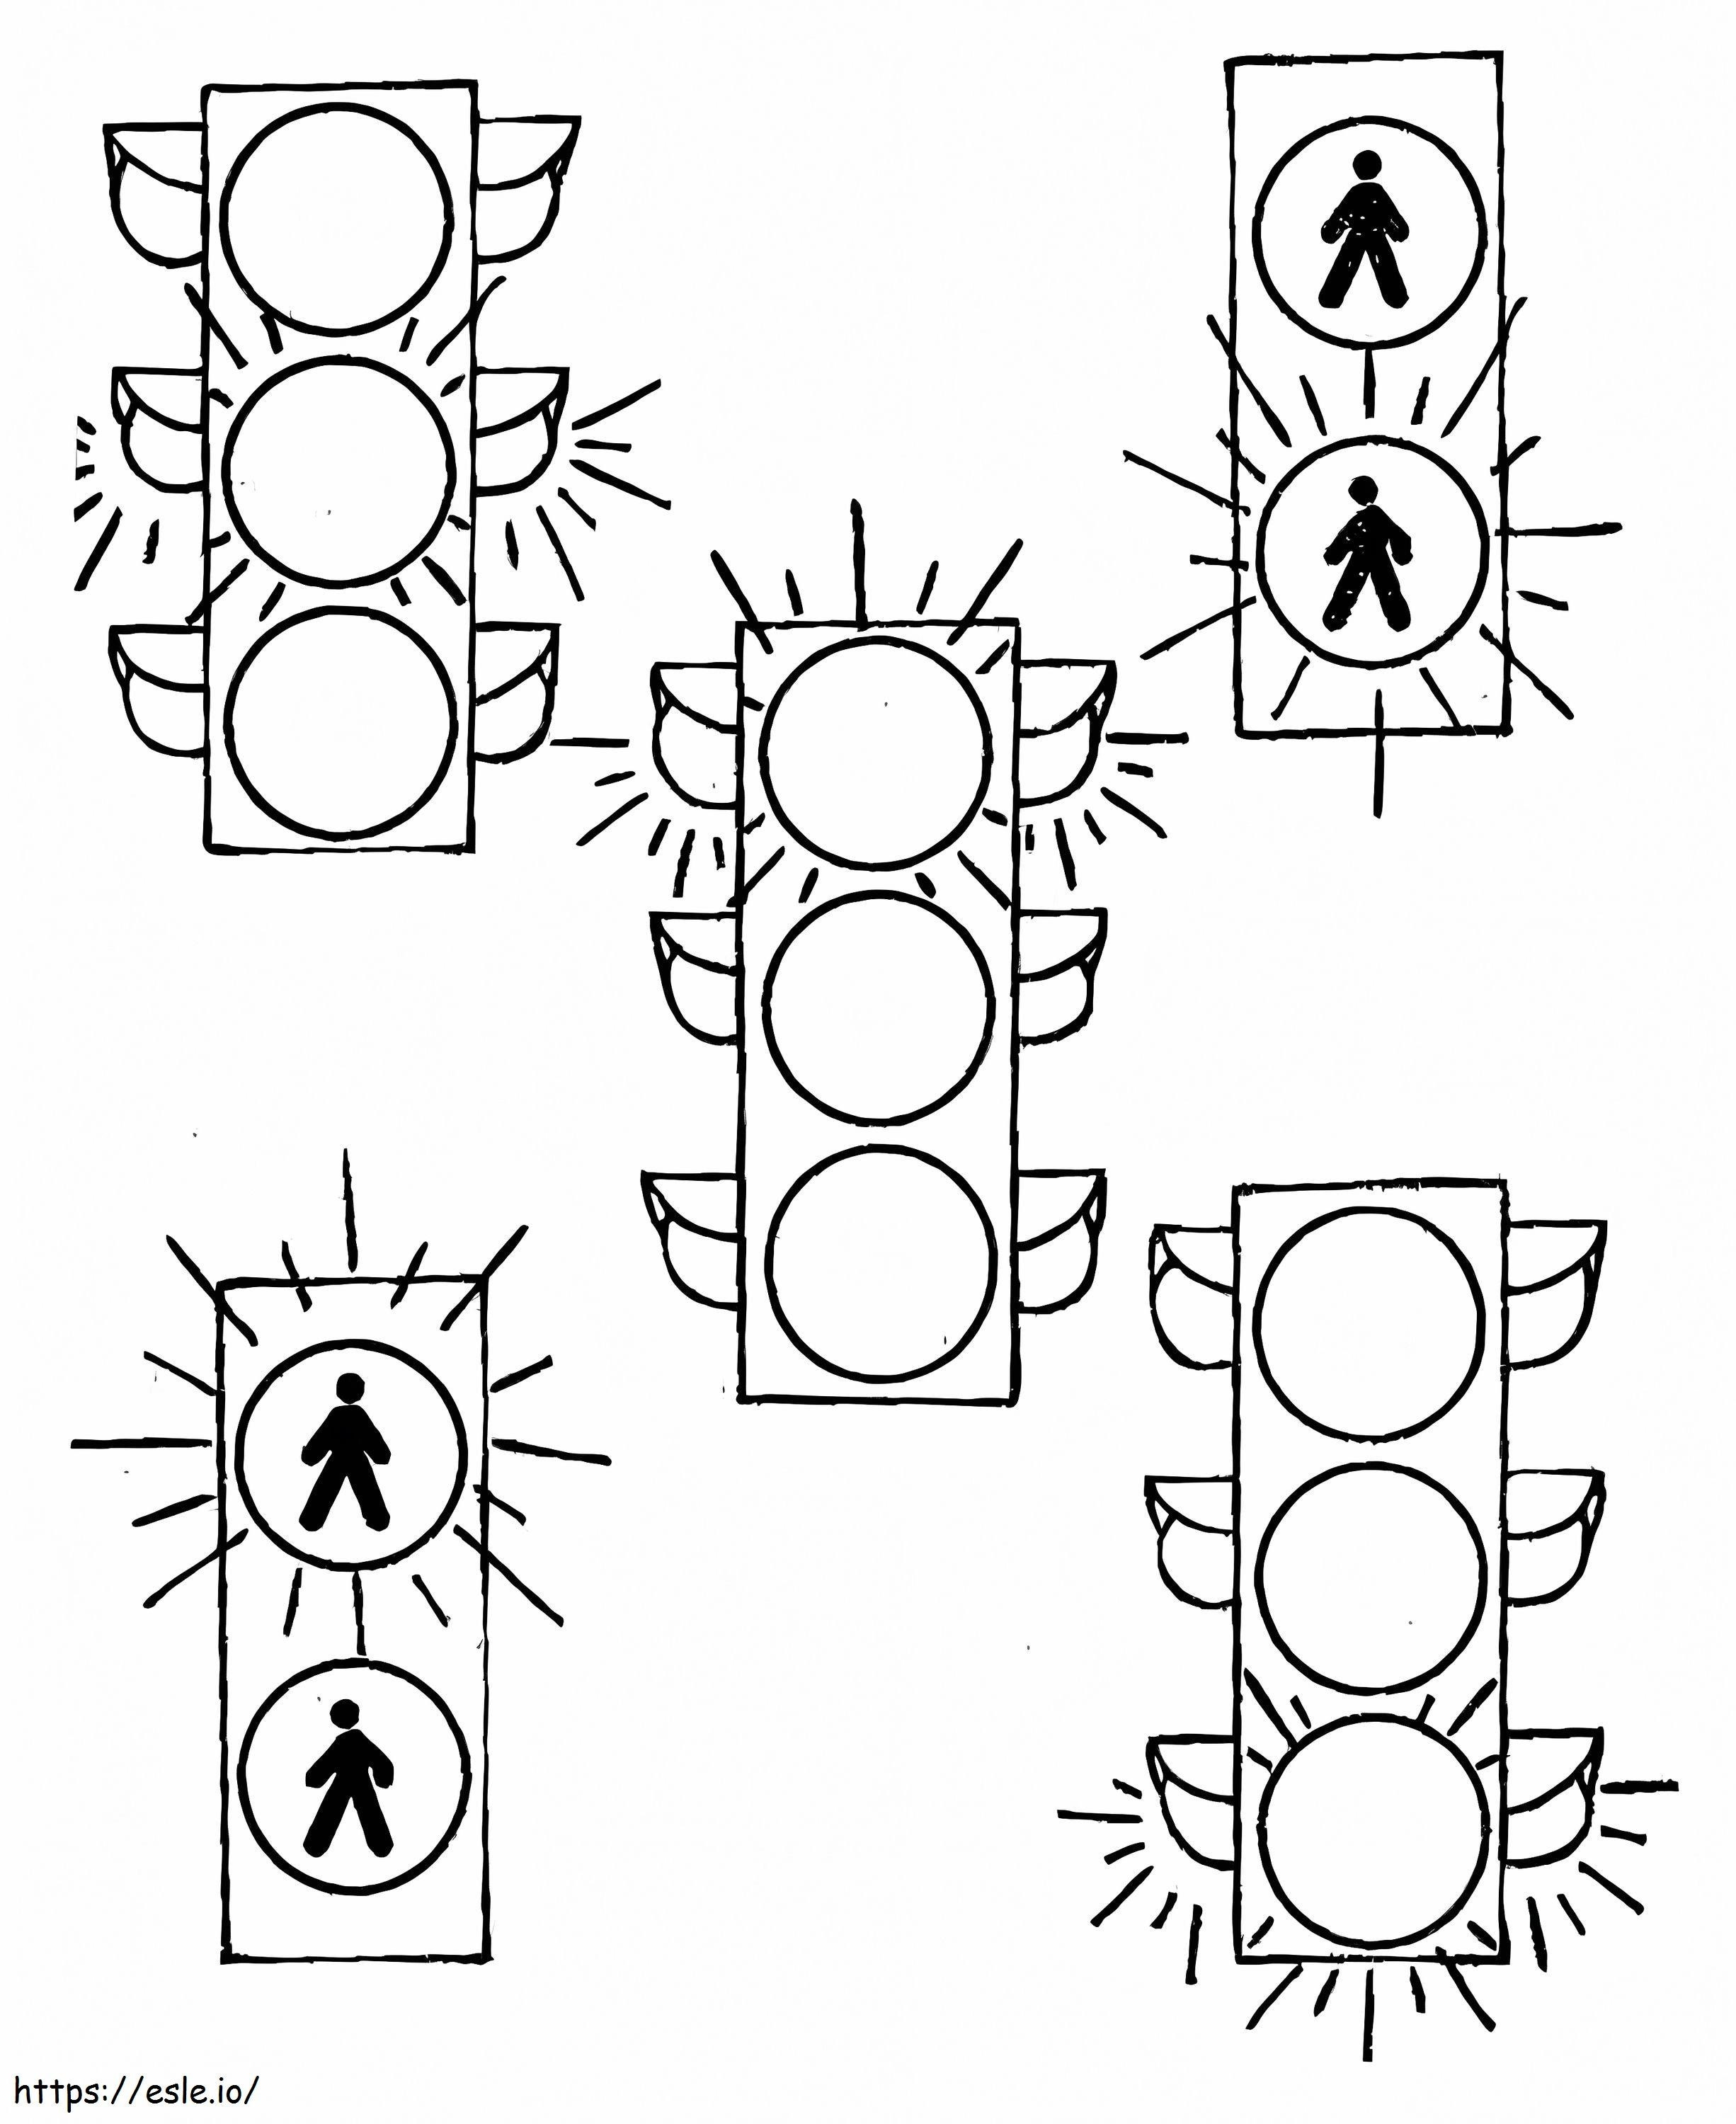 Five Traffic Lights coloring page